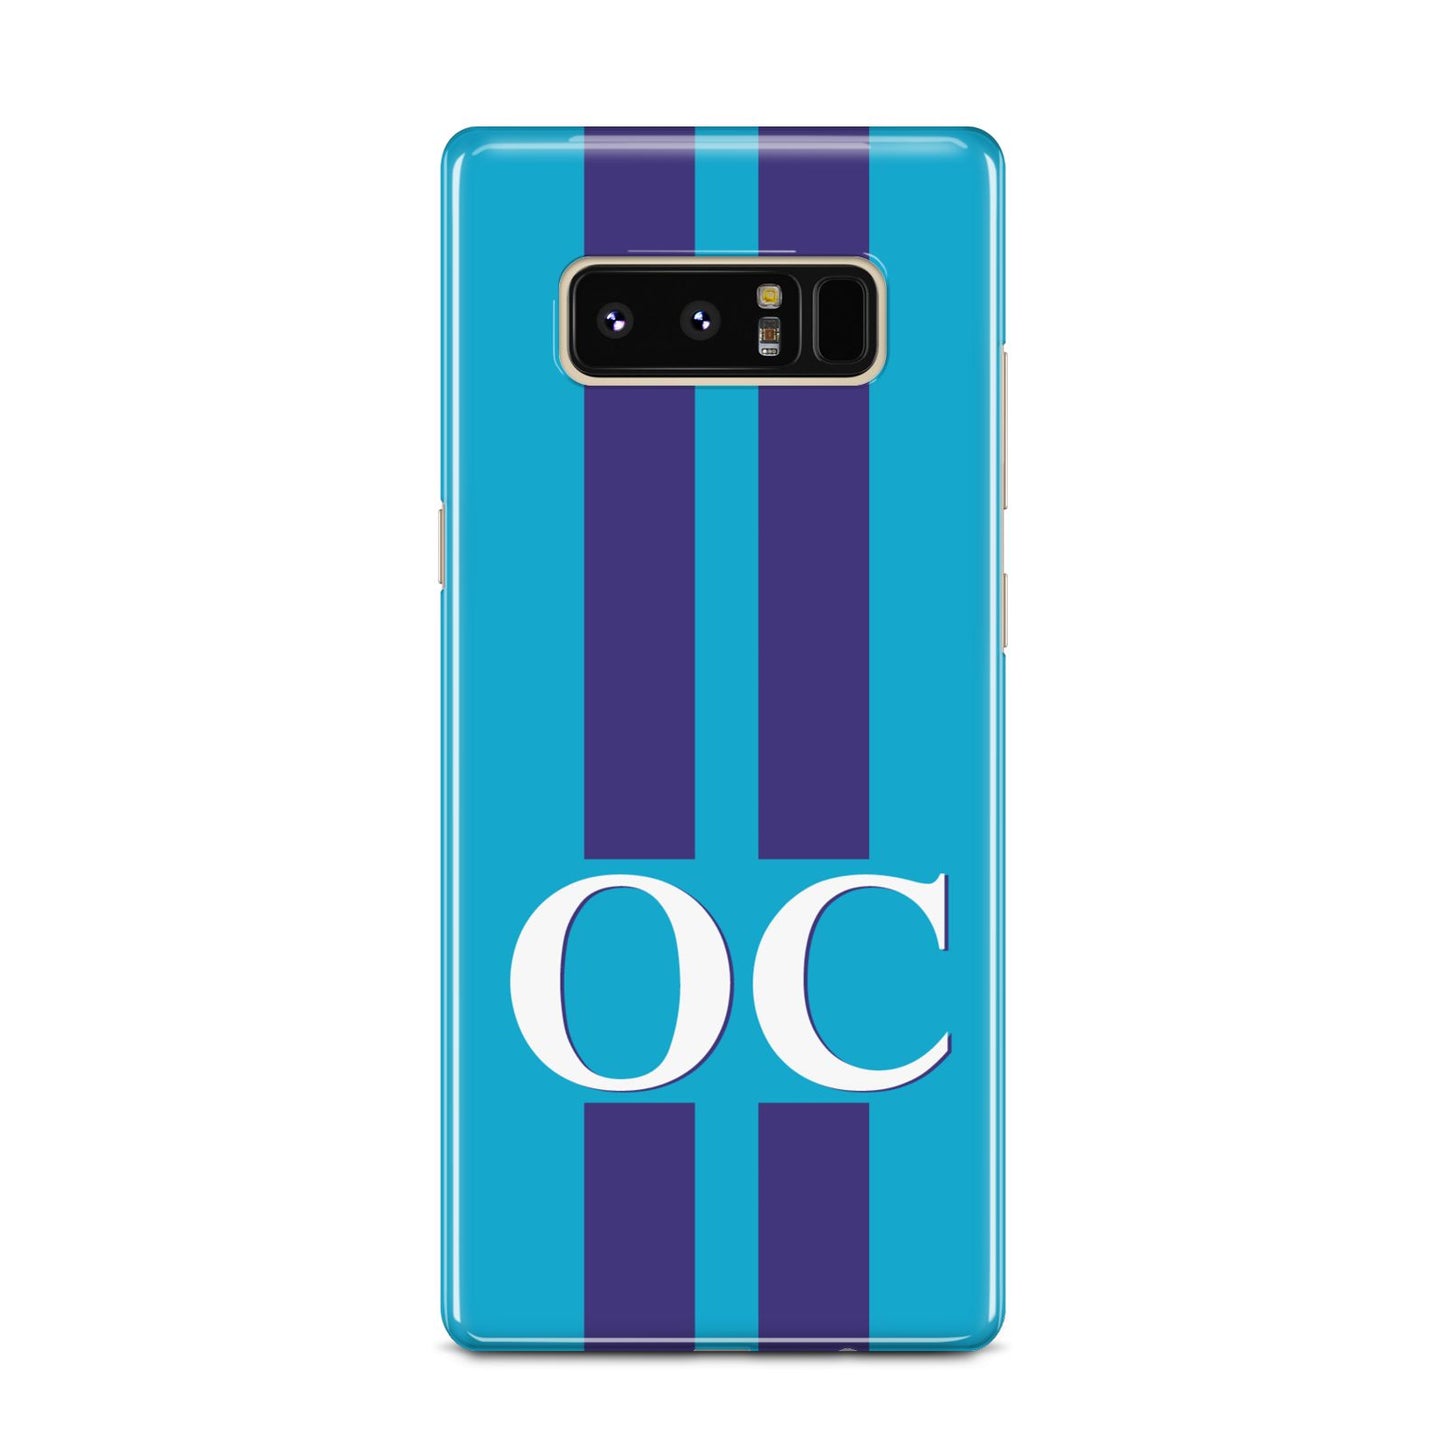 Turquoise Personalised Samsung Galaxy Note 8 Case